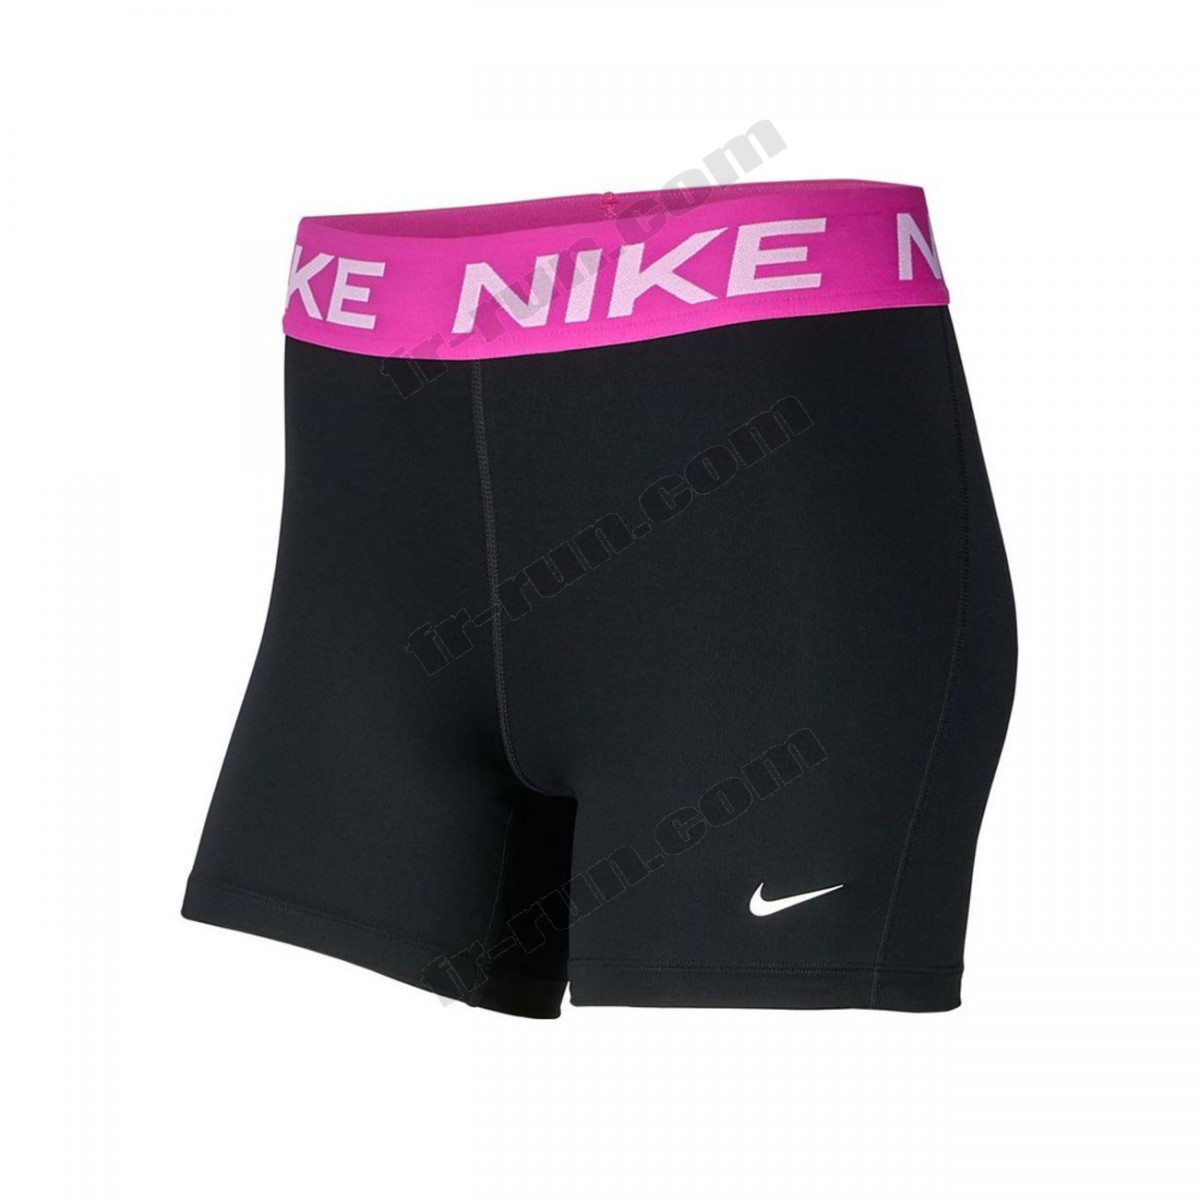 Nike/running femme NIKE Nike Wmns Victory Essential 5 √ Nouveau style √ Soldes - Nike/running femme NIKE Nike Wmns Victory Essential 5 √ Nouveau style √ Soldes